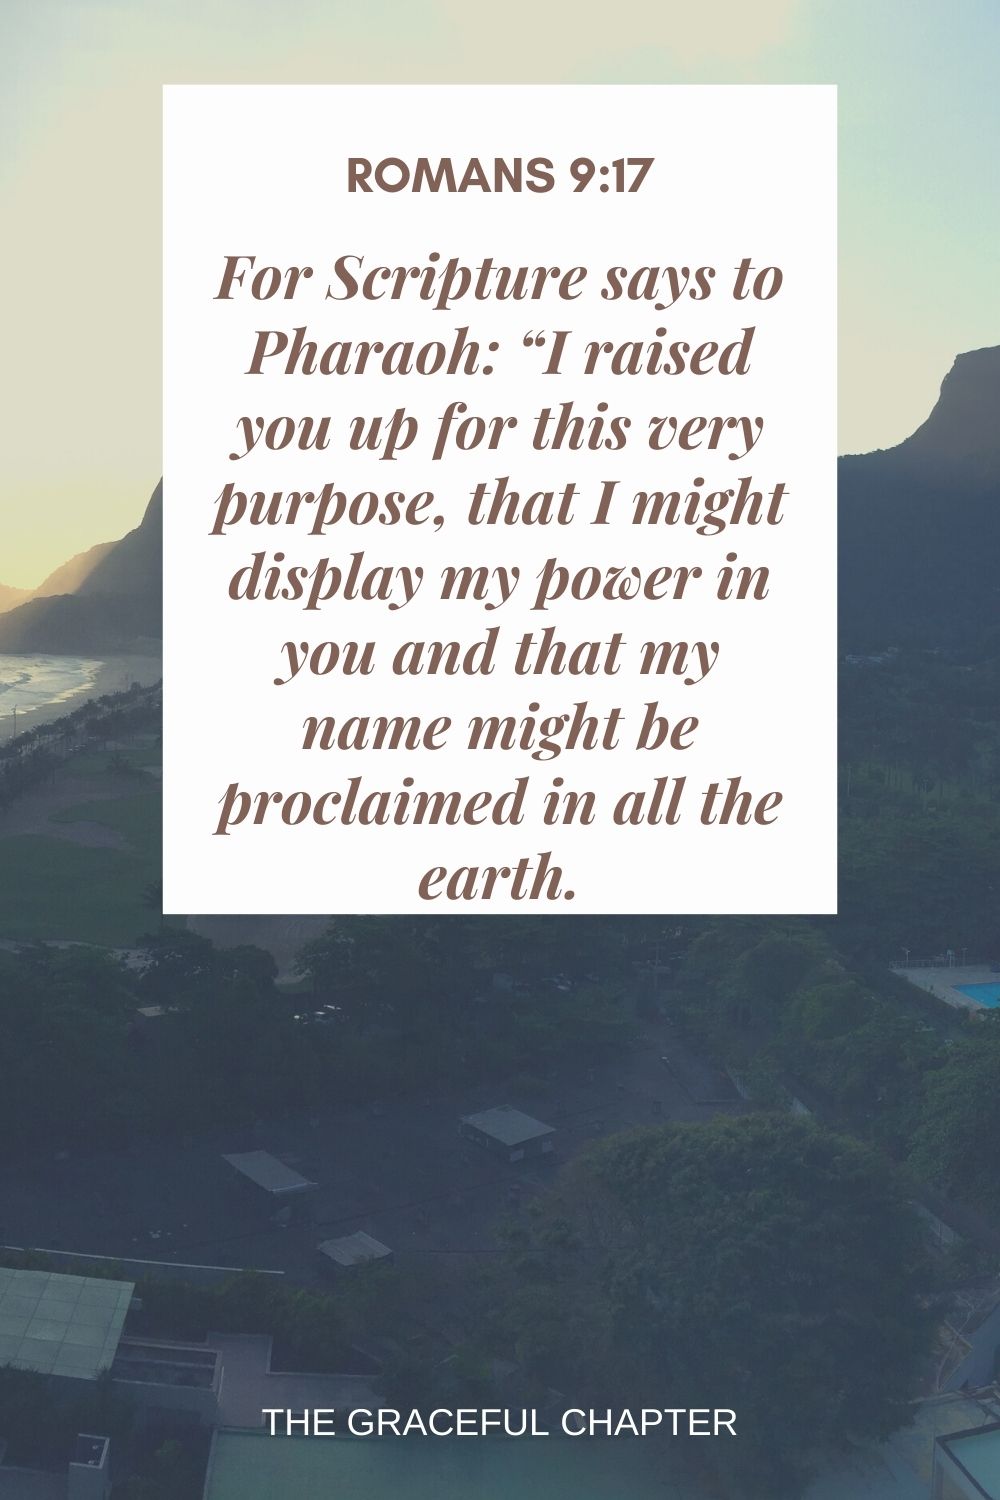 For Scripture says to Pharaoh: “I raised you up for this very purpose, that I might display my power in you and that my name might be proclaimed in all the earth. Romans 9:17